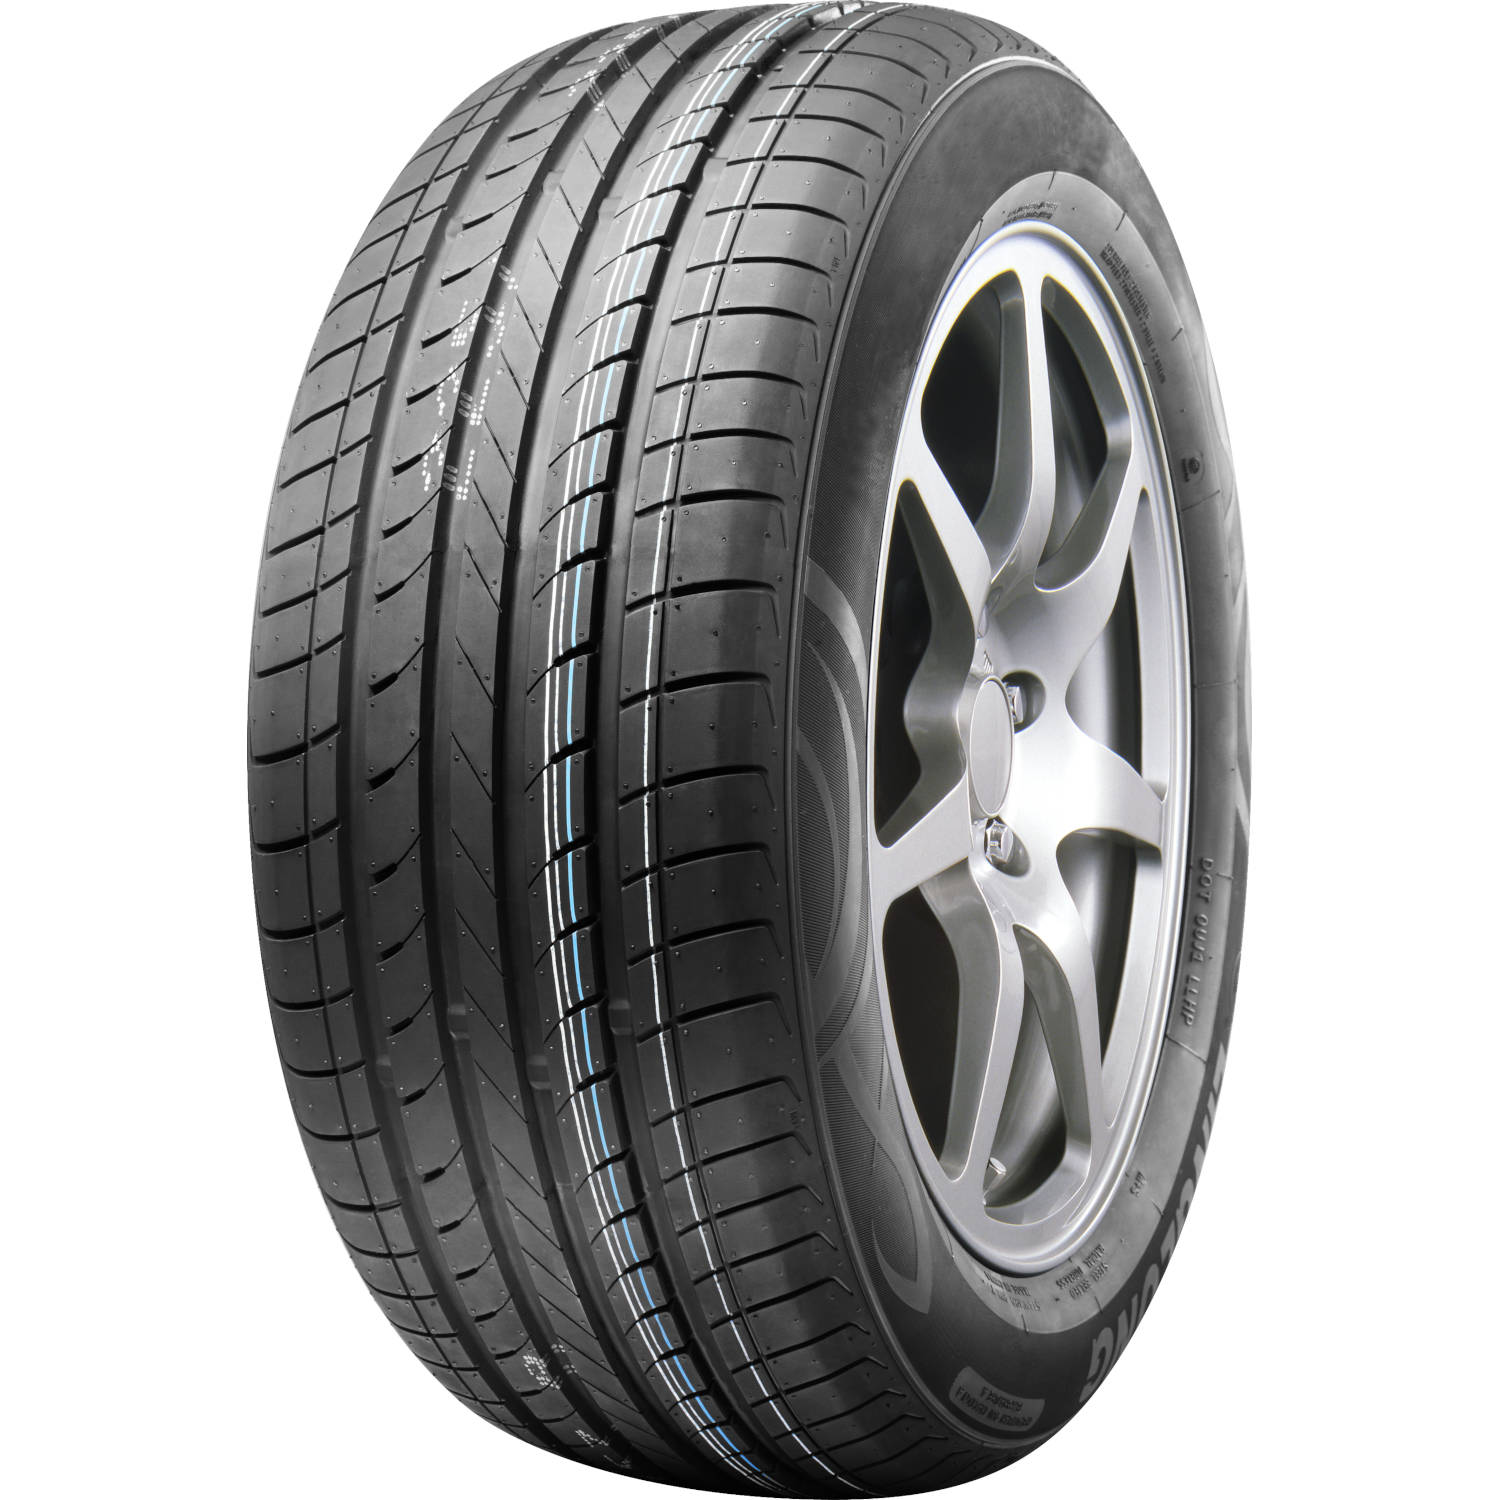 ROAD ONE CAVALRY HP 225/60R16 (26.6X8.9R 16) Tires